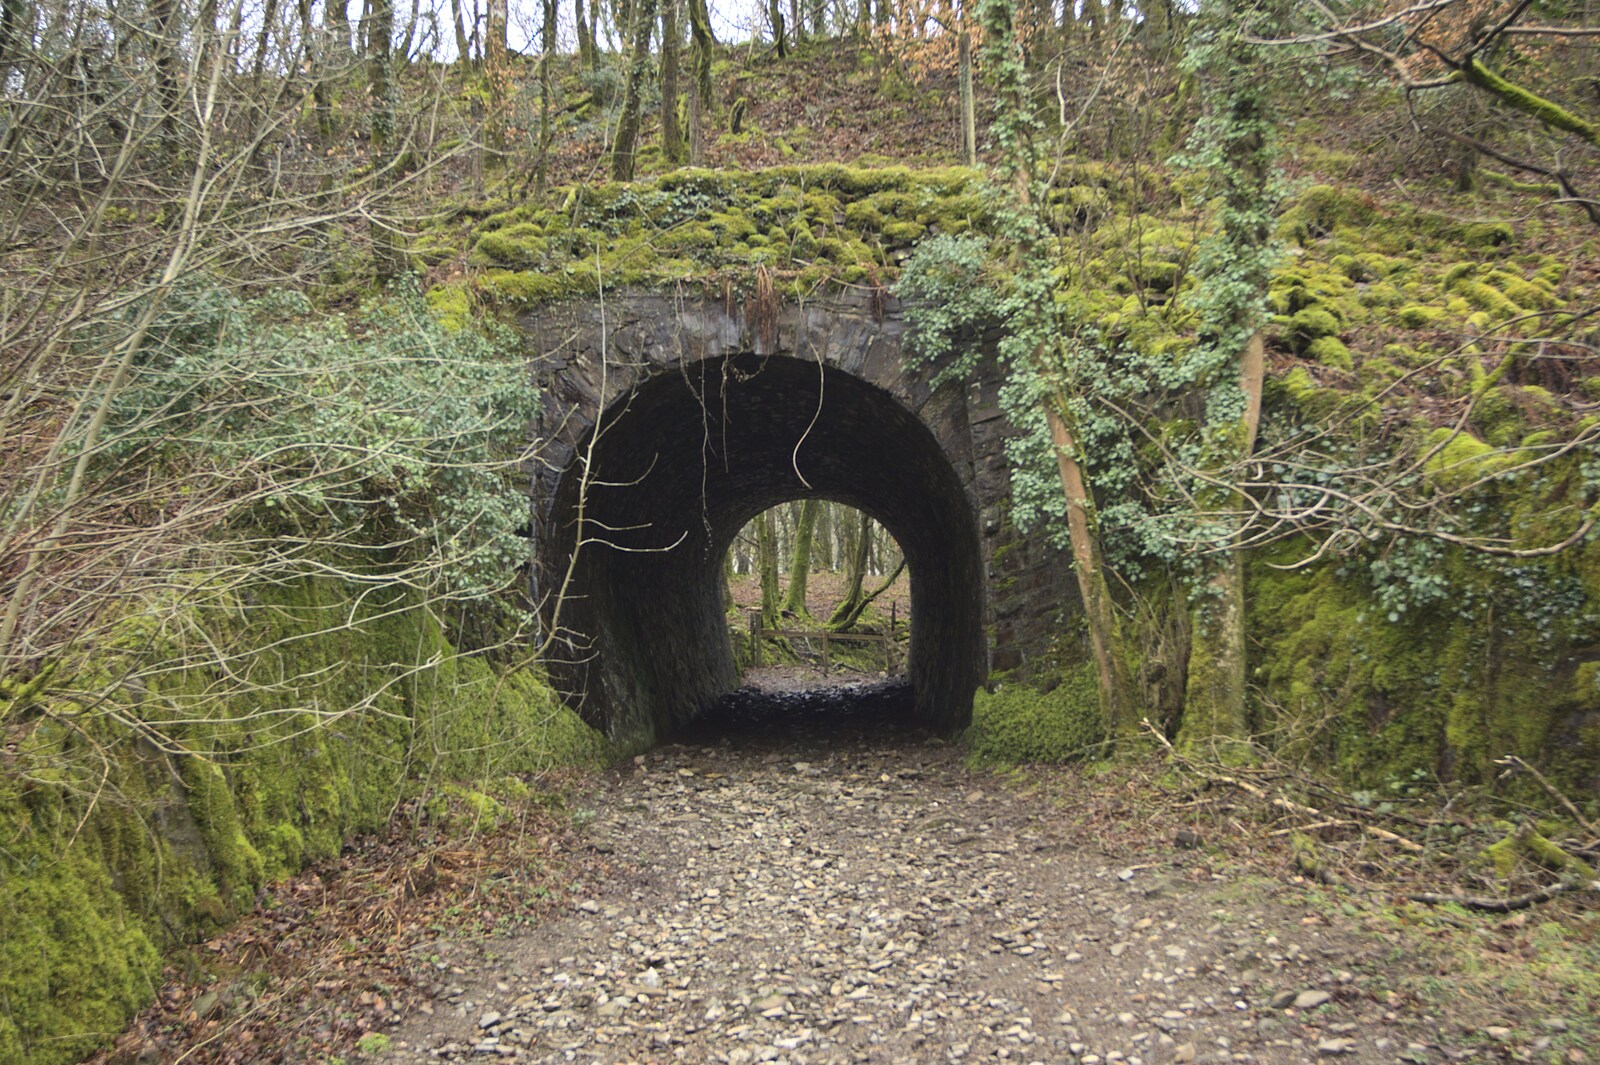 A short tunnel under the old railway line near Meavy from Easter in Chagford and Hoo Meavy, Devon - 3rd April 2010